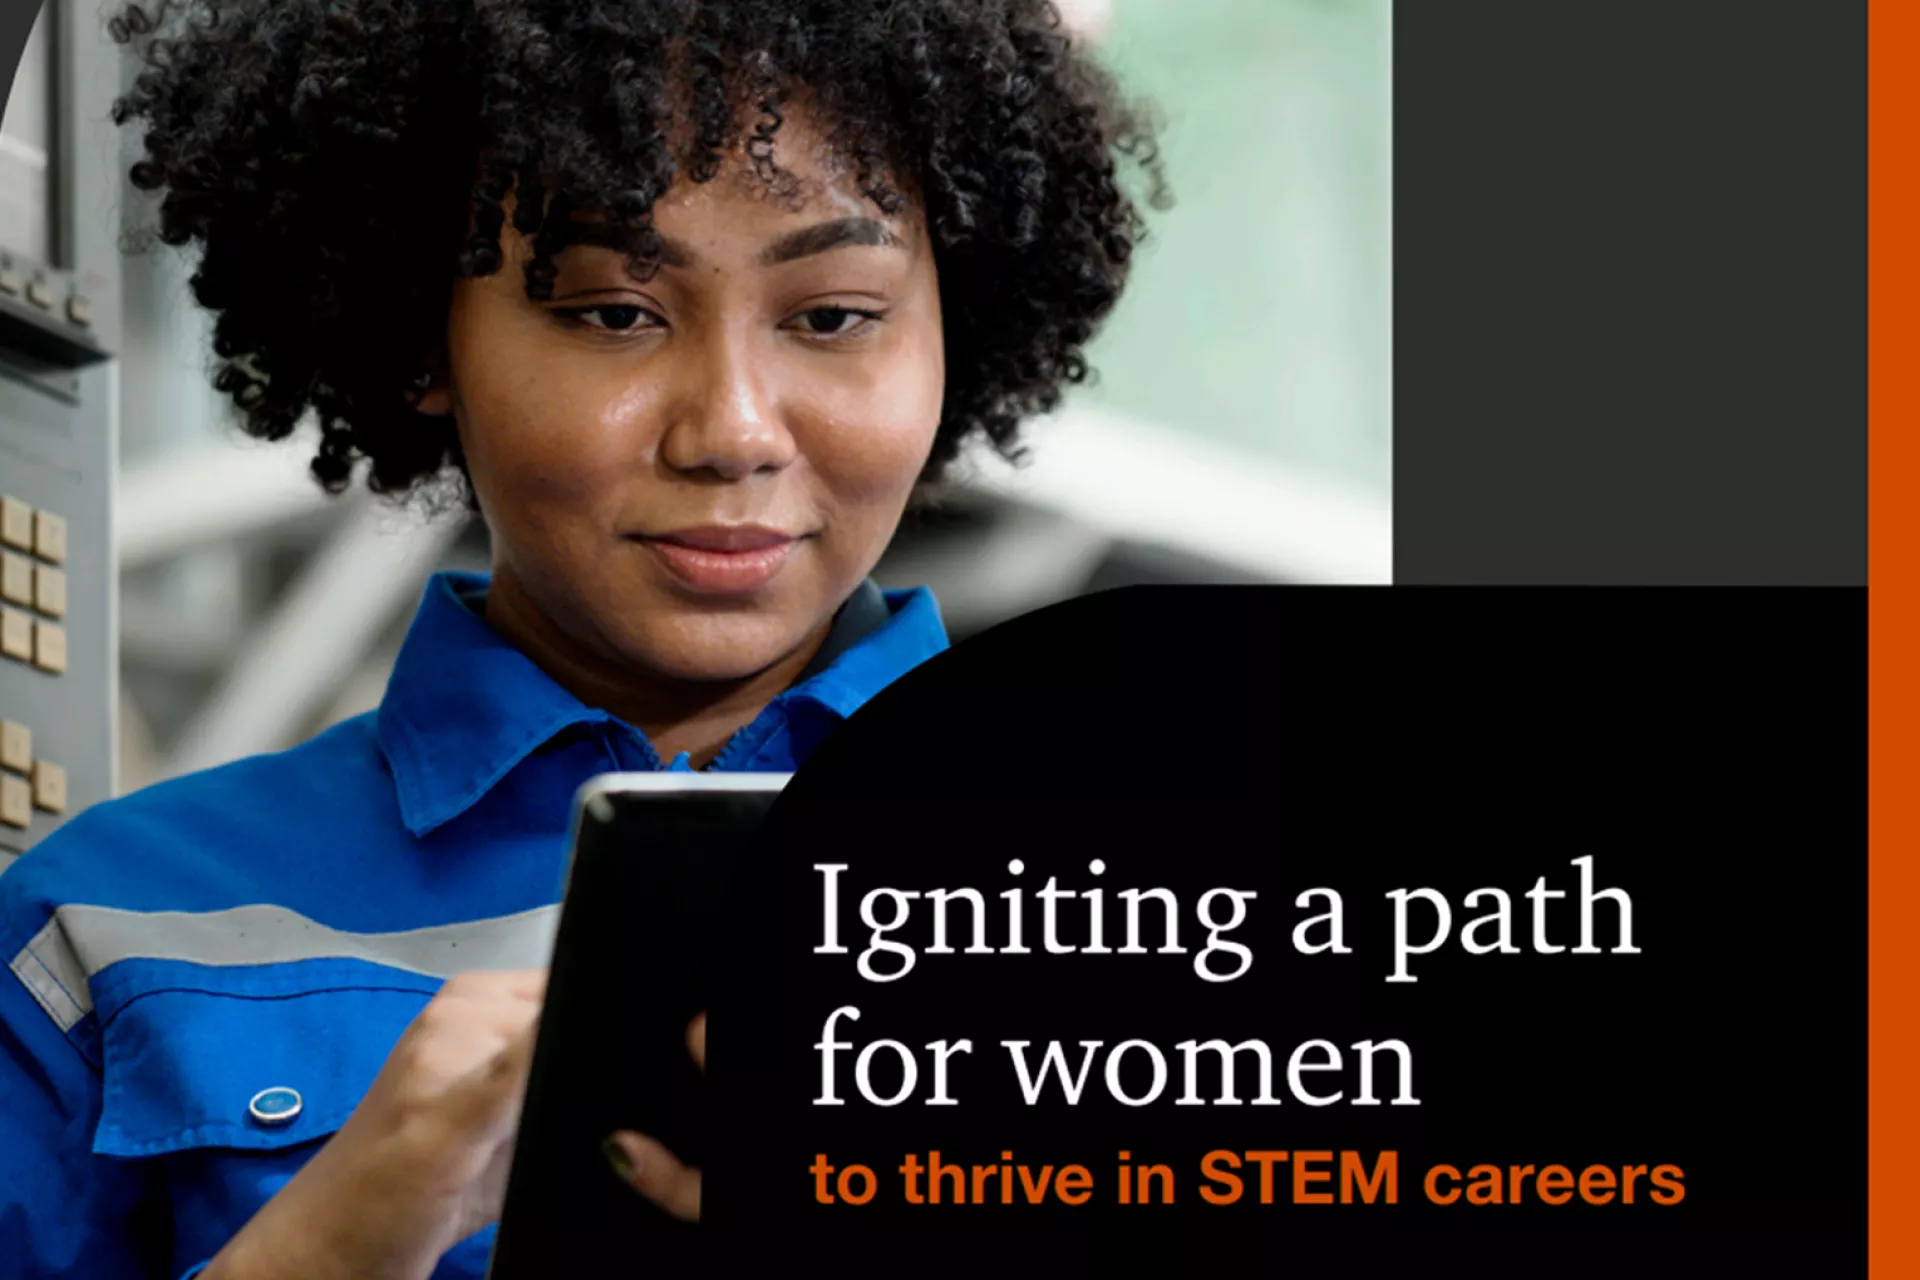 Feature image for the report showing a young woman working in STEM